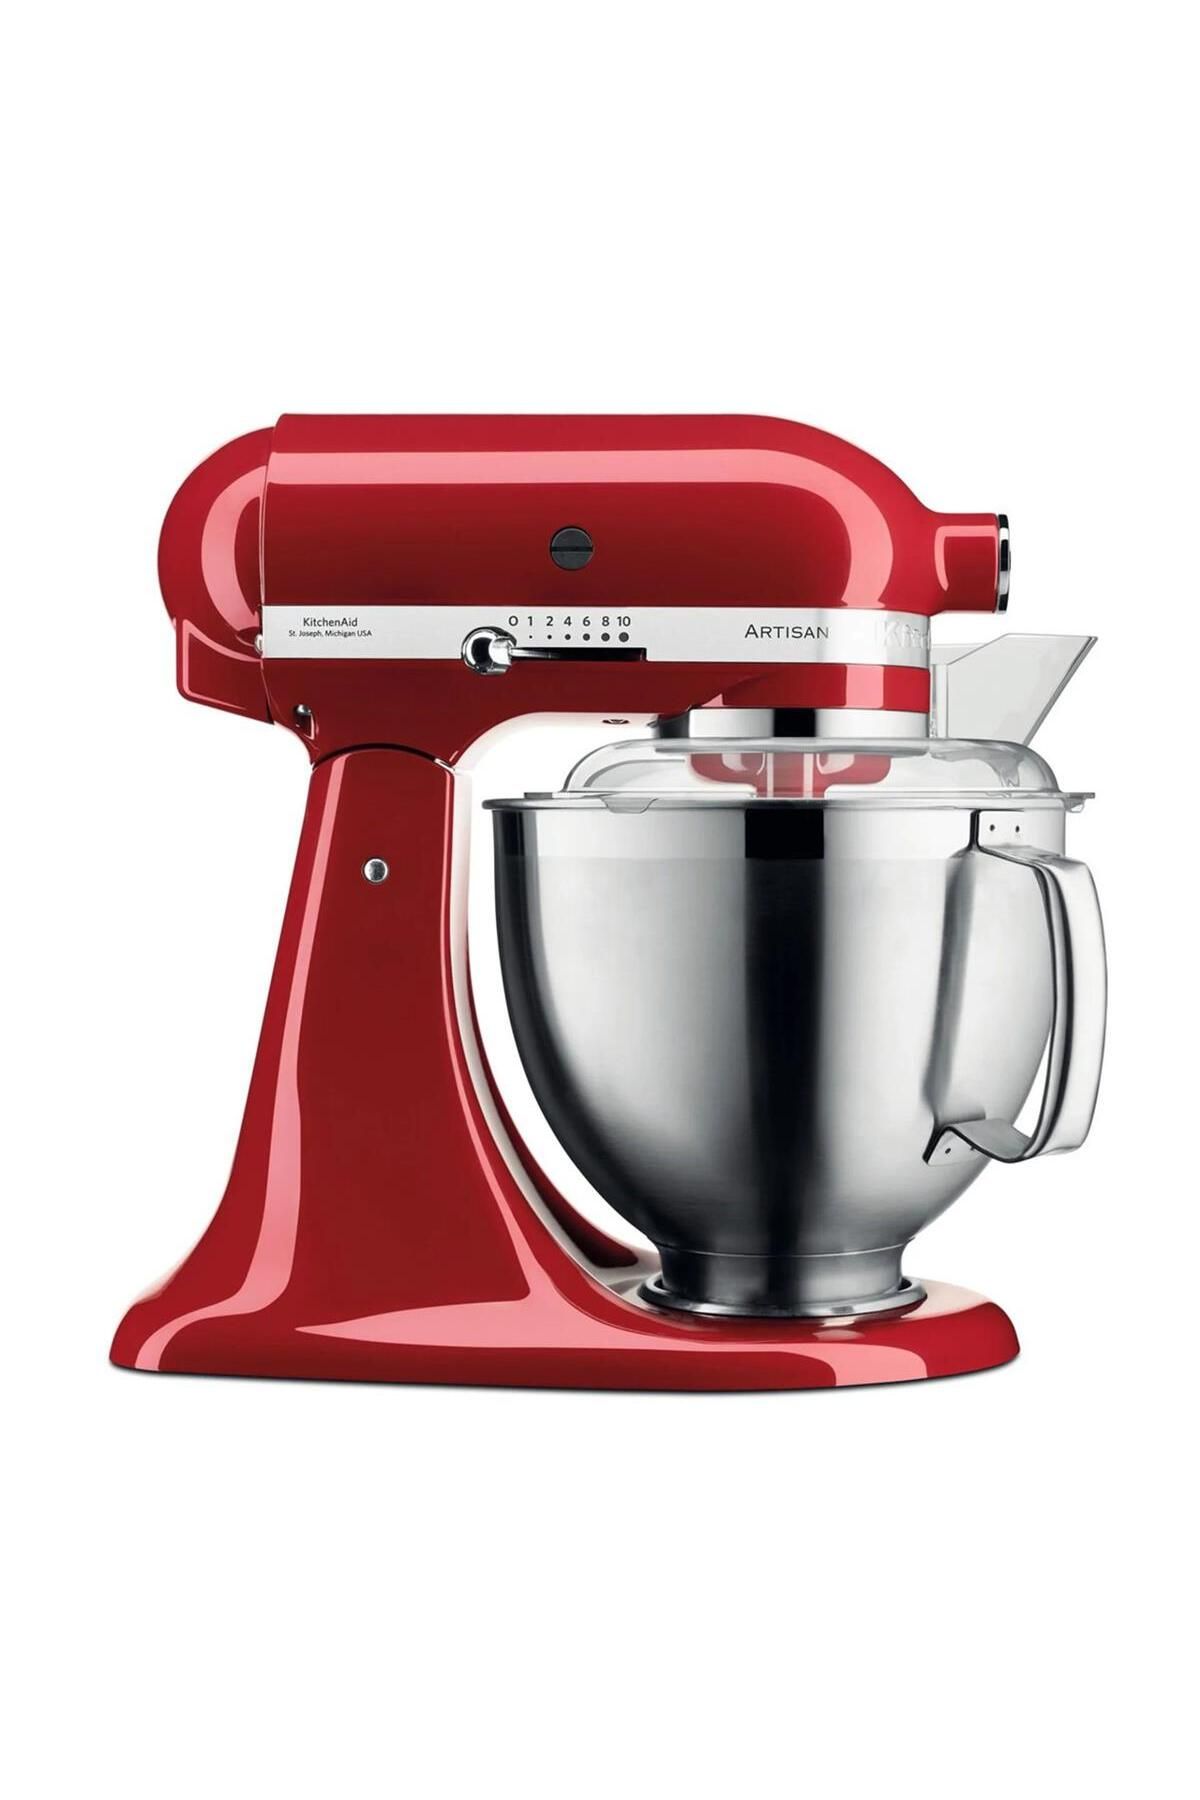 Kitchenaid Artisan 4,8 L Stand Mikser 5ksm185ps Empire Red-eer